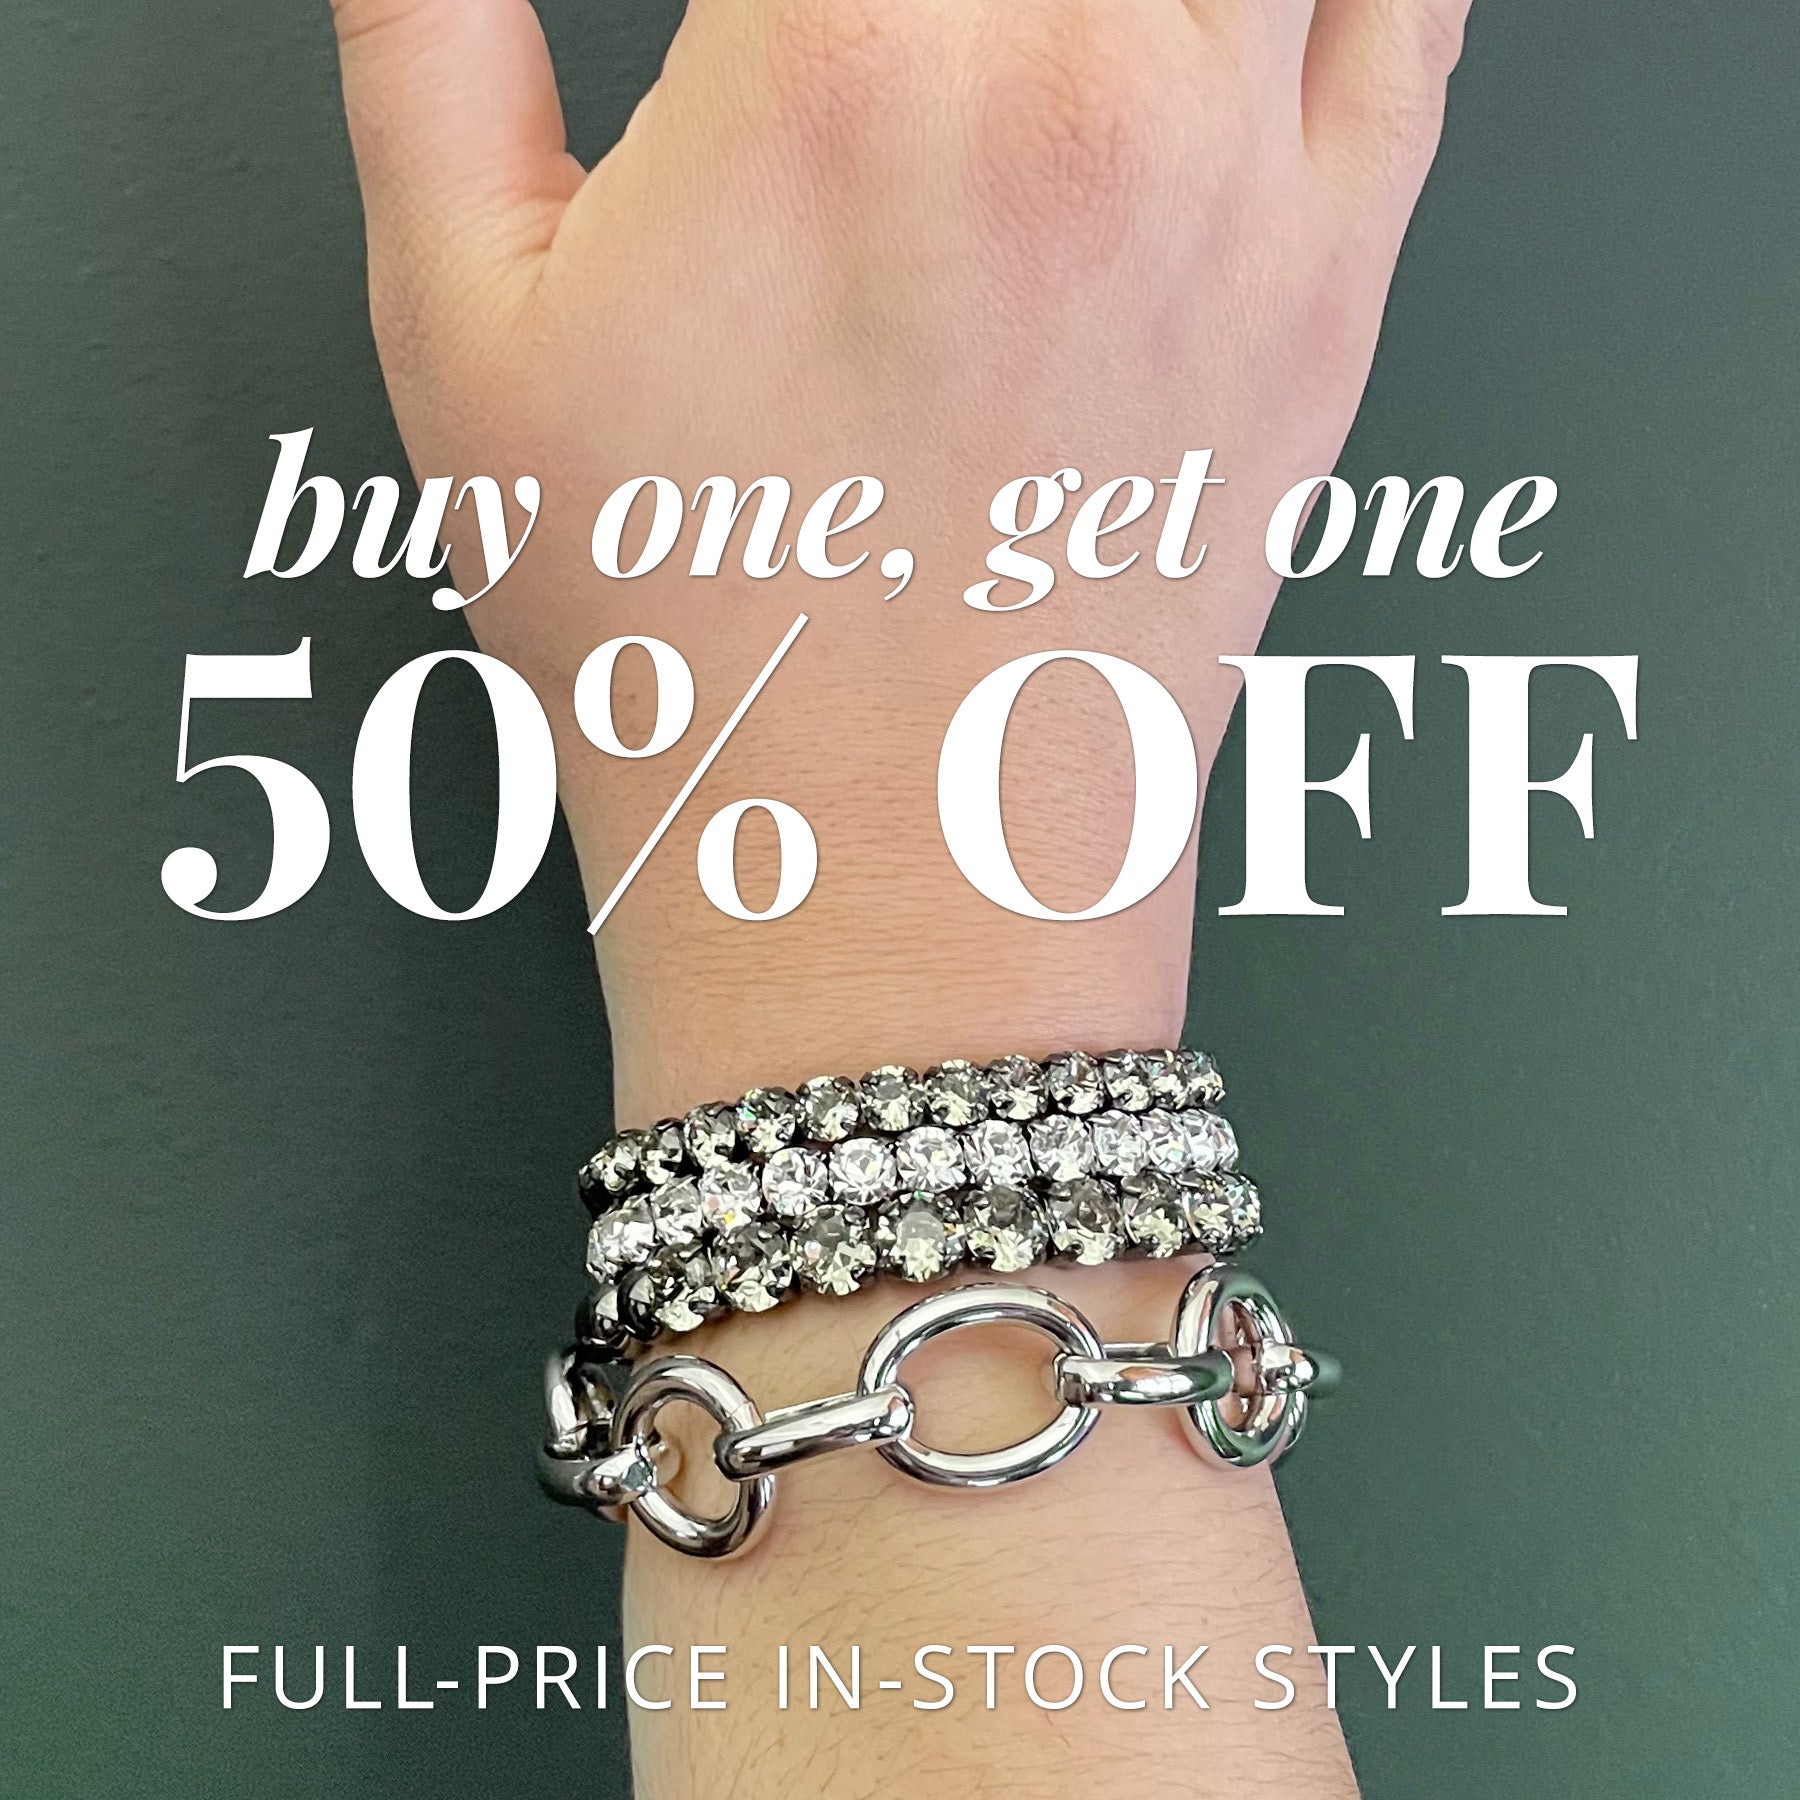 Buy One, Get One 50% Off all Full-Price In-Stock Styles